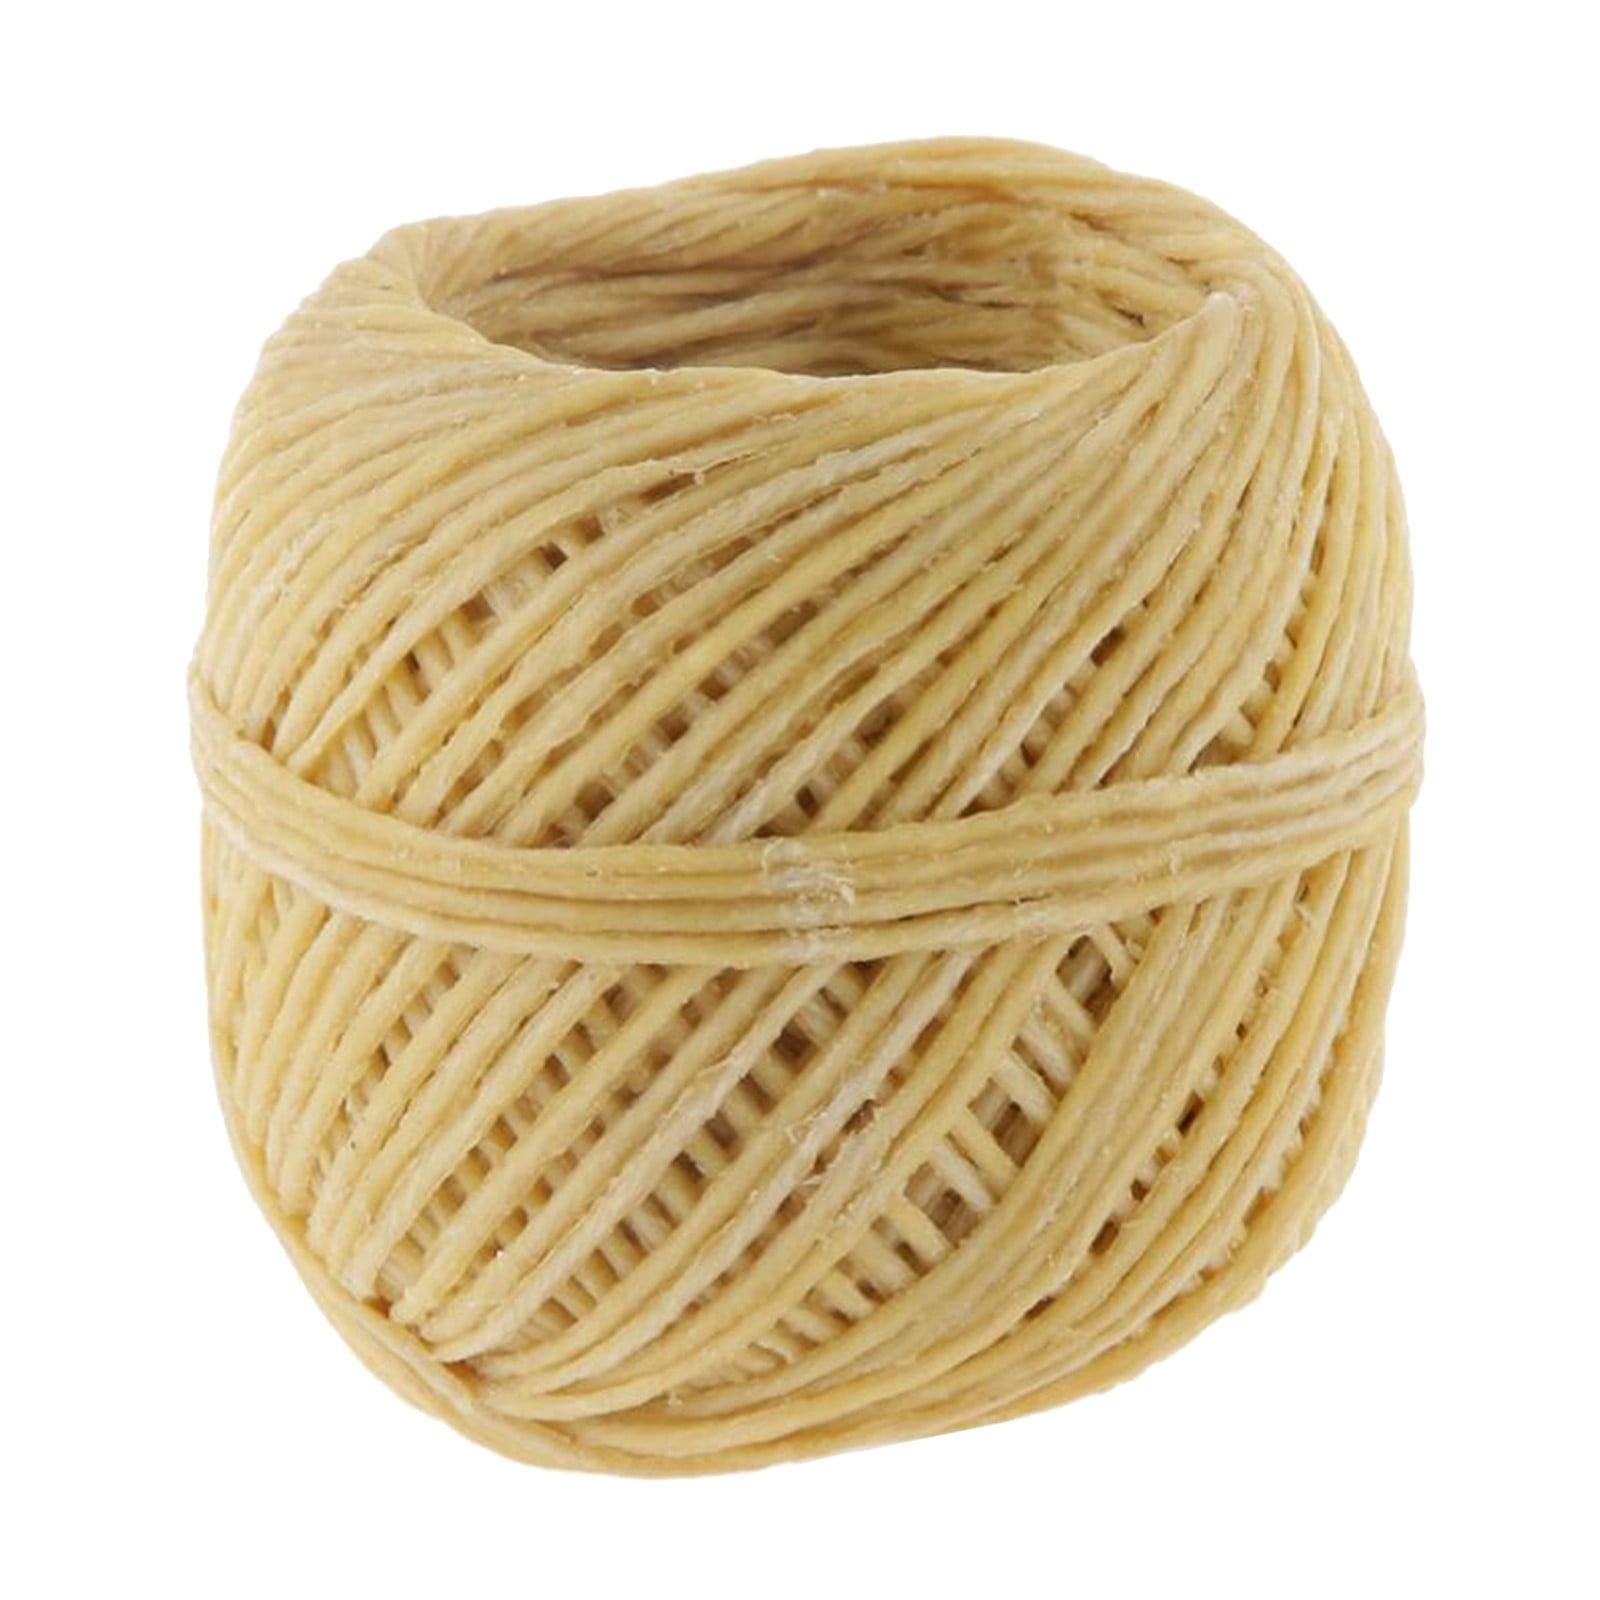 100% Organic Hemp Candle Wick 2.0mm Thick + Wick Sustainer Tabs 200pcs for  Candle Making, 23 Bees, European Imported Hemp Spool 200ft with Natural